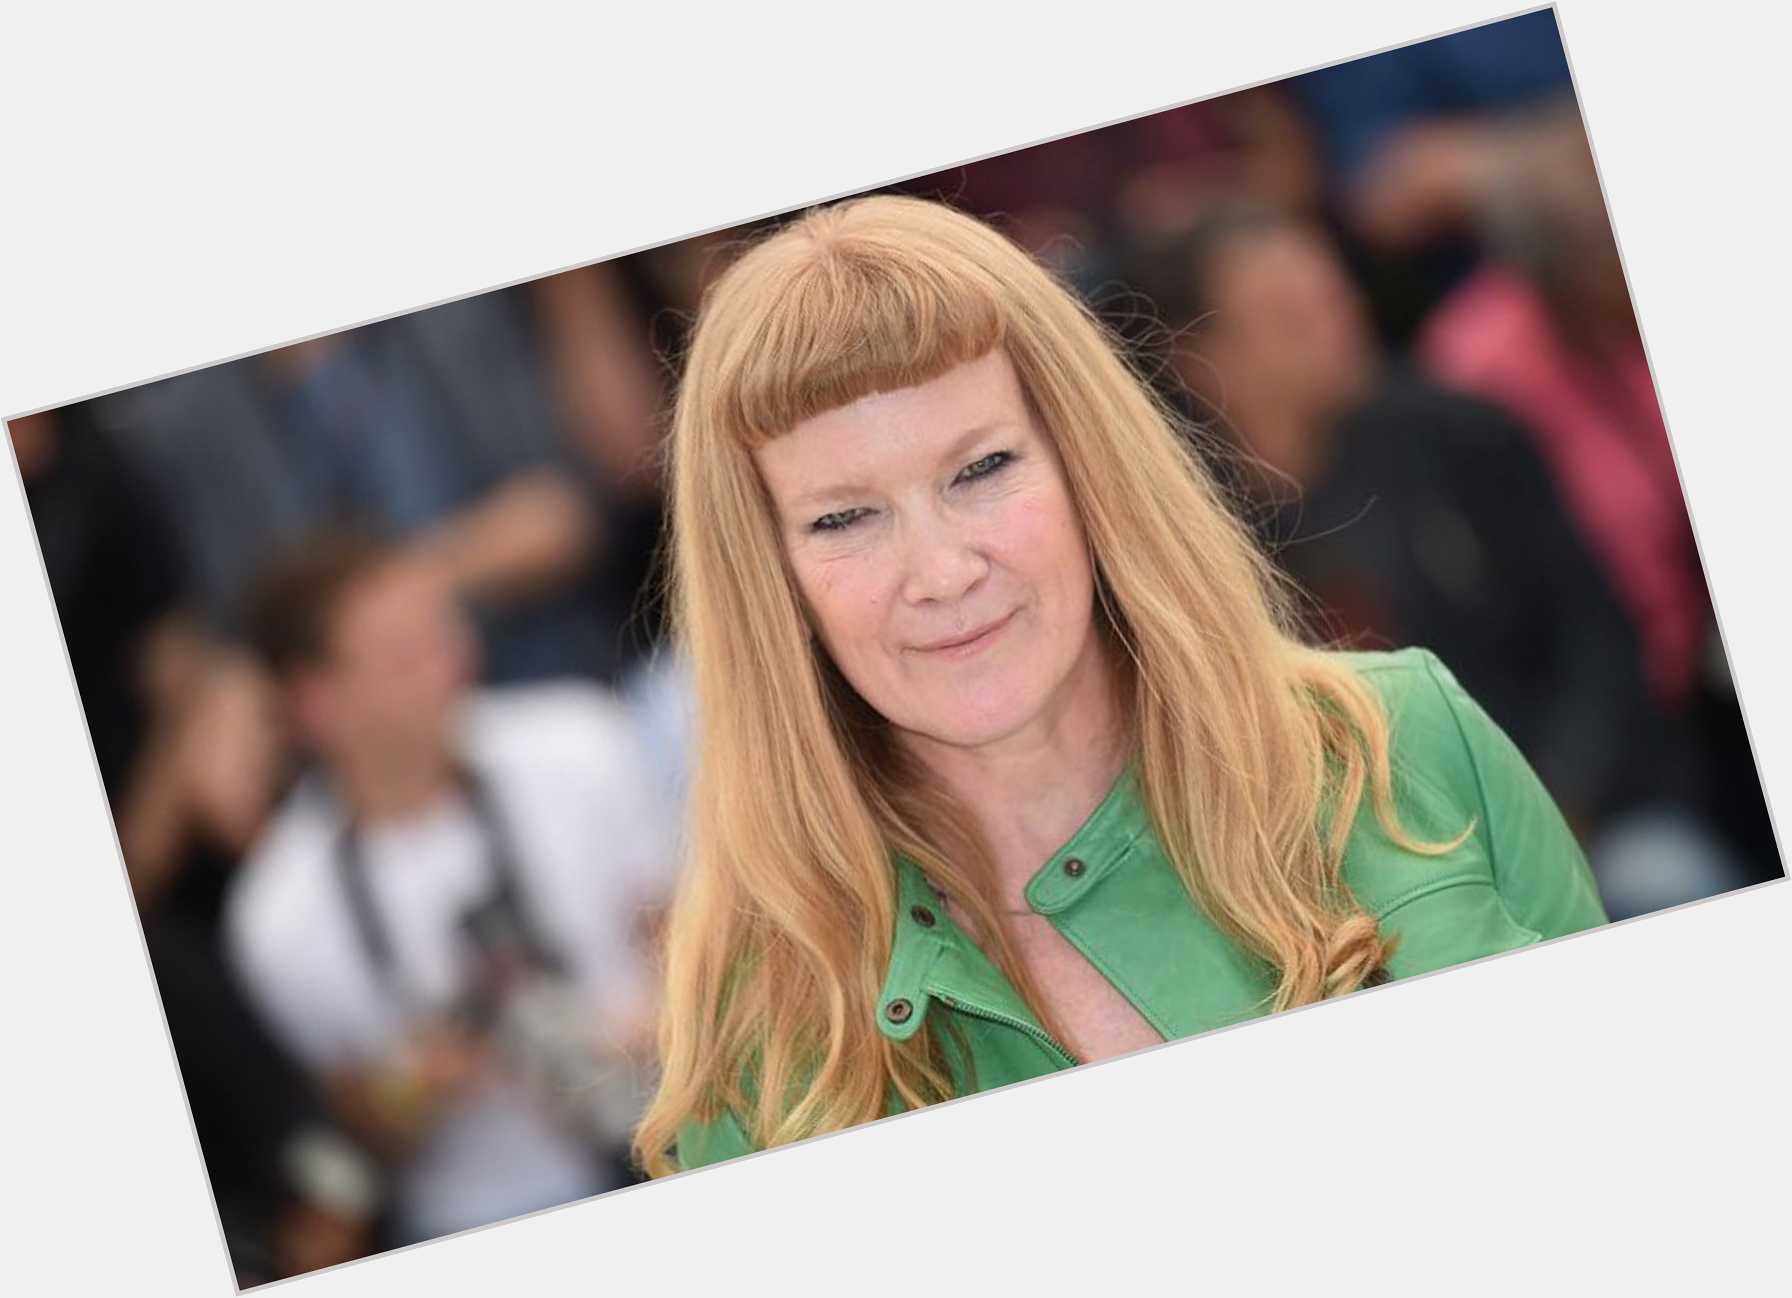 Https://fanpagepress.net/m/A/Andrea Arnold Dating 5